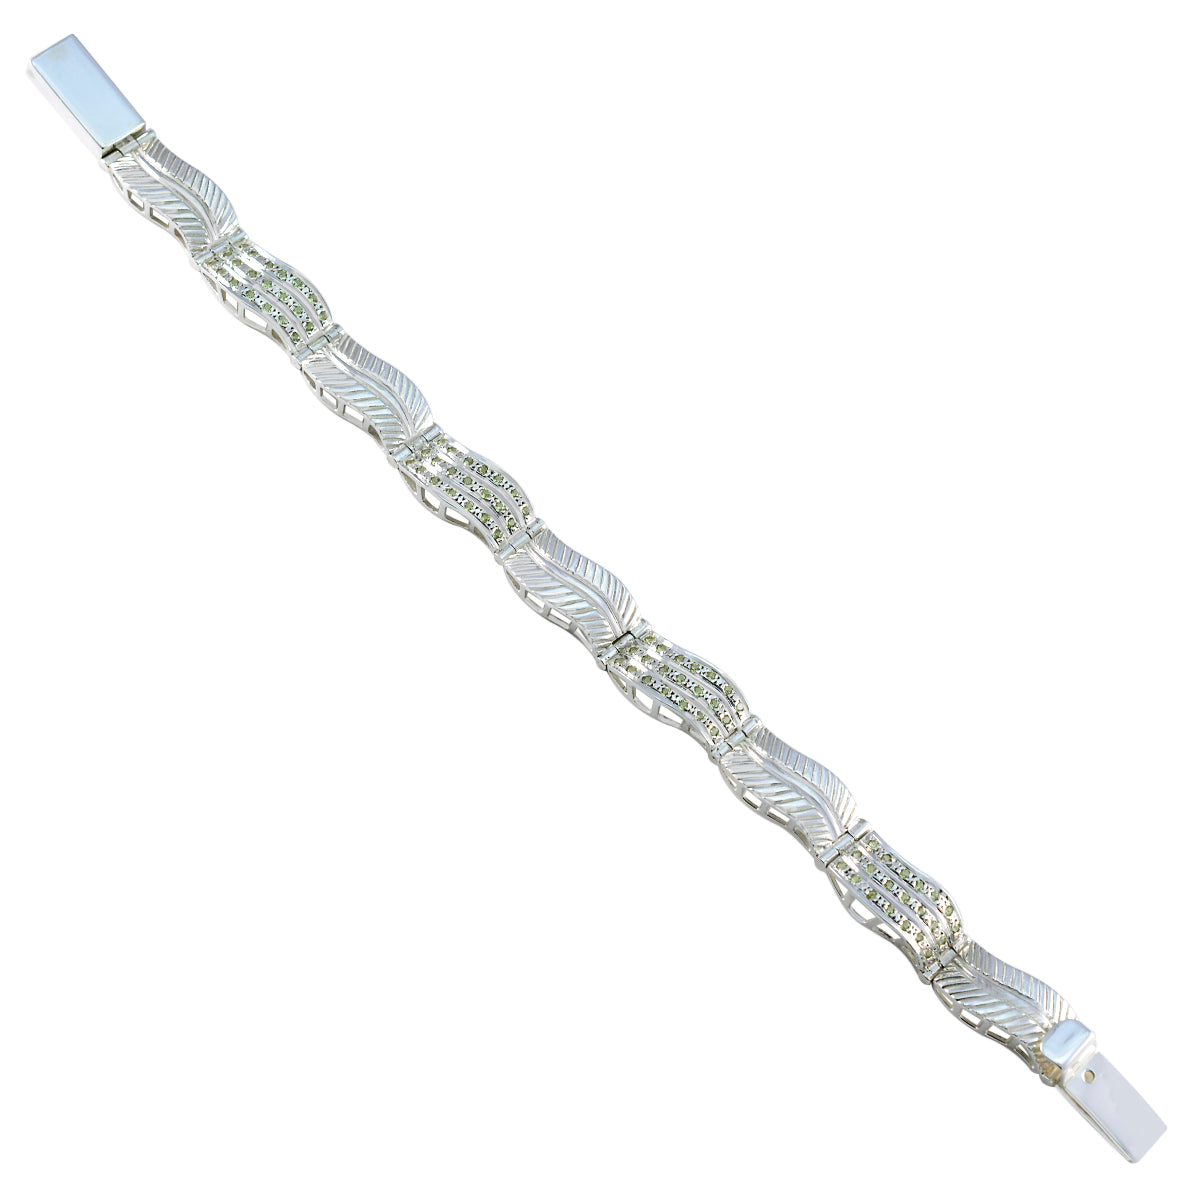 Riyo Manufacturer 925 Sterling Silver Bracelet For Girl Peridot Prong Setting Bracelet with Box With Tongue Tennis Bracelet L Size 6-8.5 Inch.